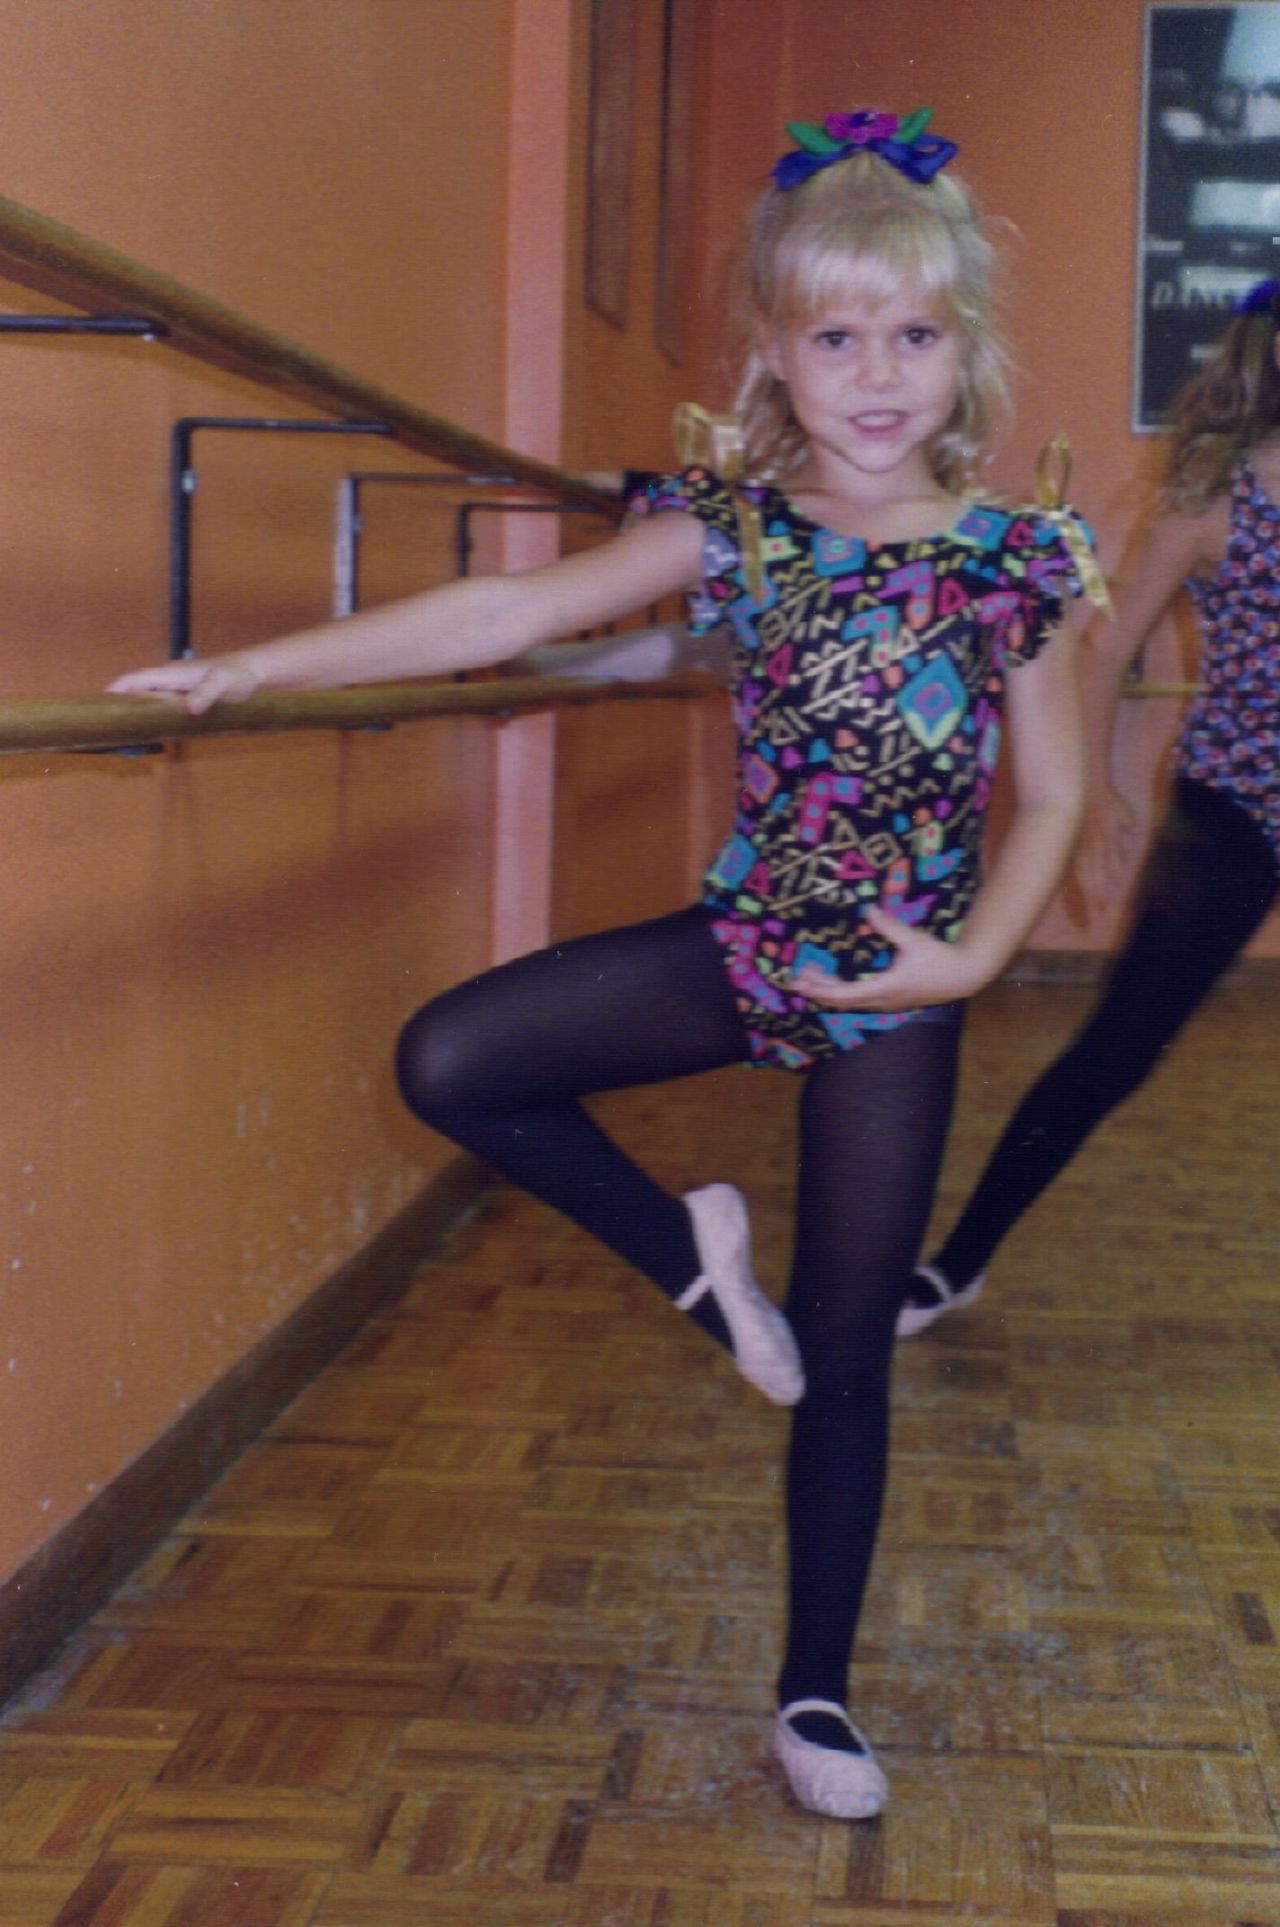 A young Kirsten strikes a ballet pose. She once dreamed of becoming a famous ballerina.